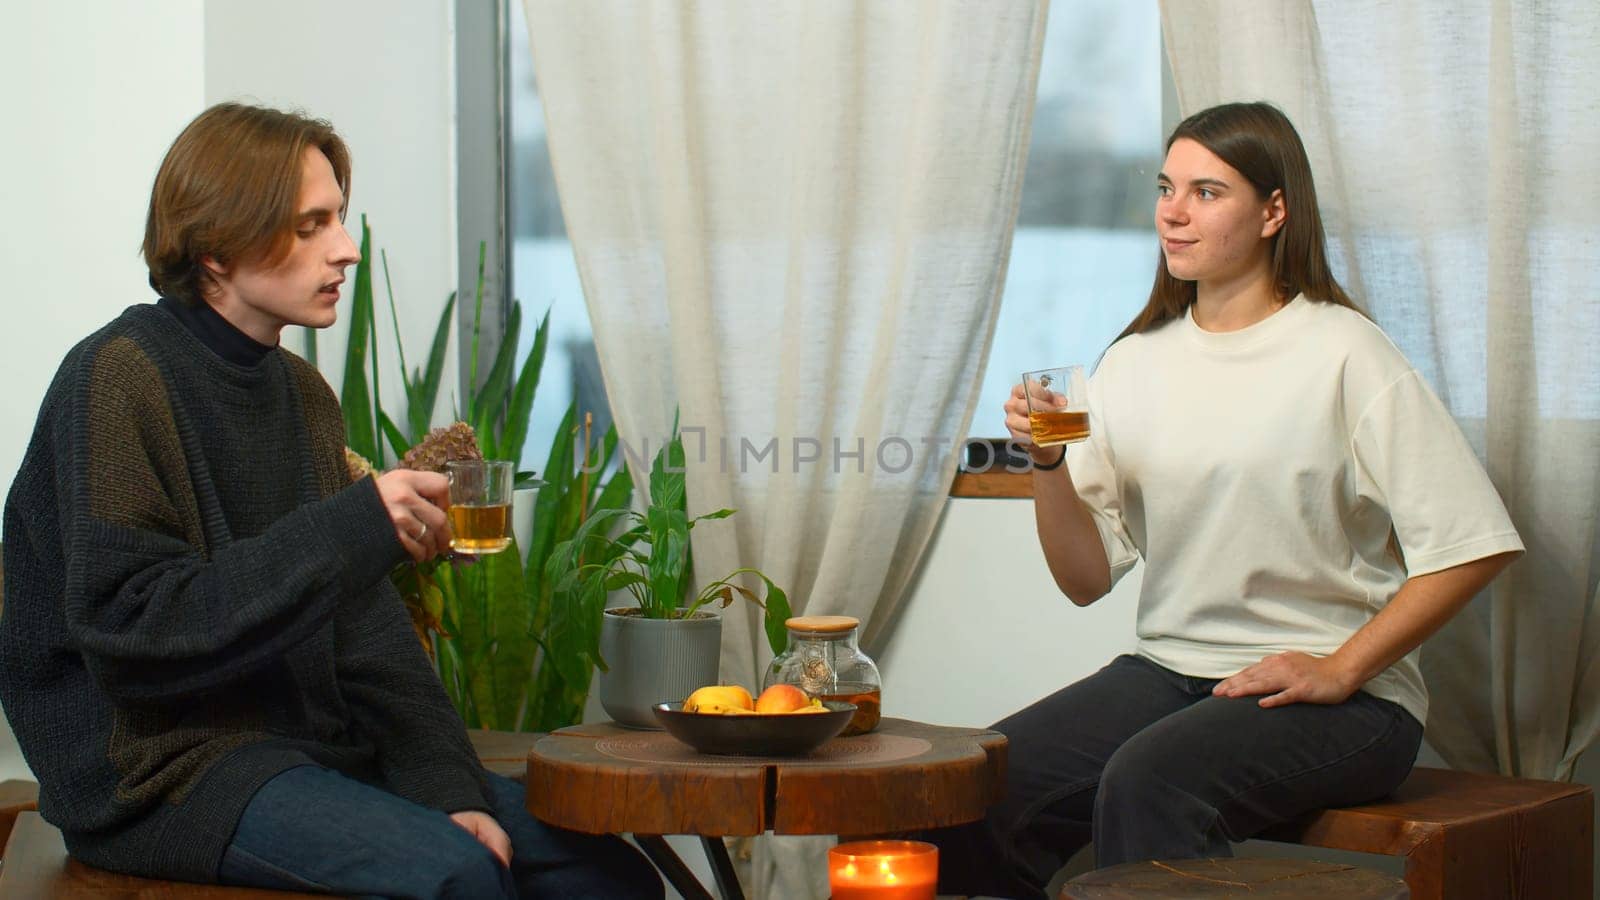 Students communicate and drink tea in cafe. Media. Young man and woman are drinking tea and talking in cafe. Cheerful conversation between young couple of students in cozy cafe.